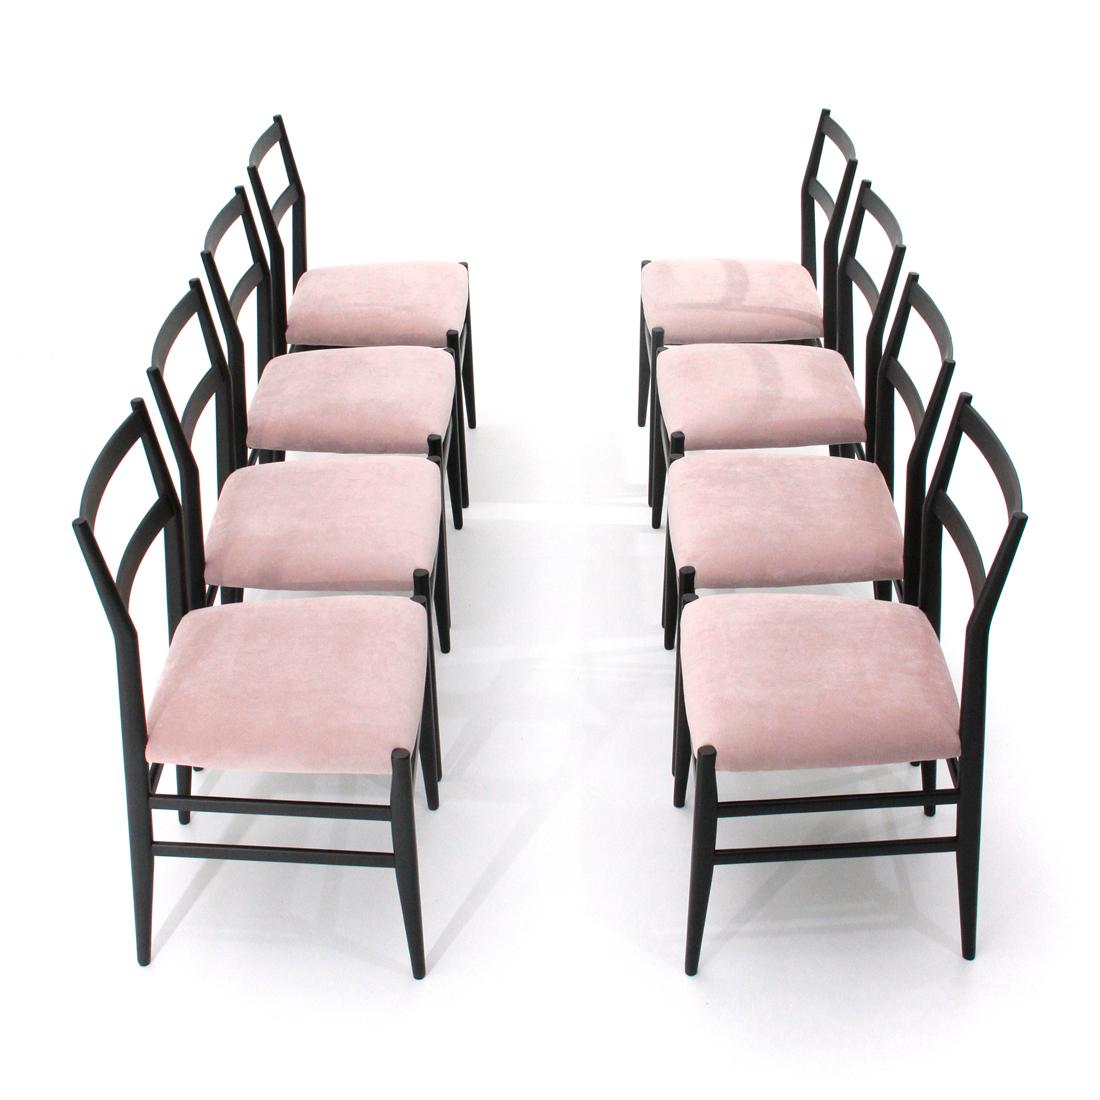 Italian Black and Pink ‘Leggera’ Chairs by Gio Ponti for Cassina, 1950s, Set of 8